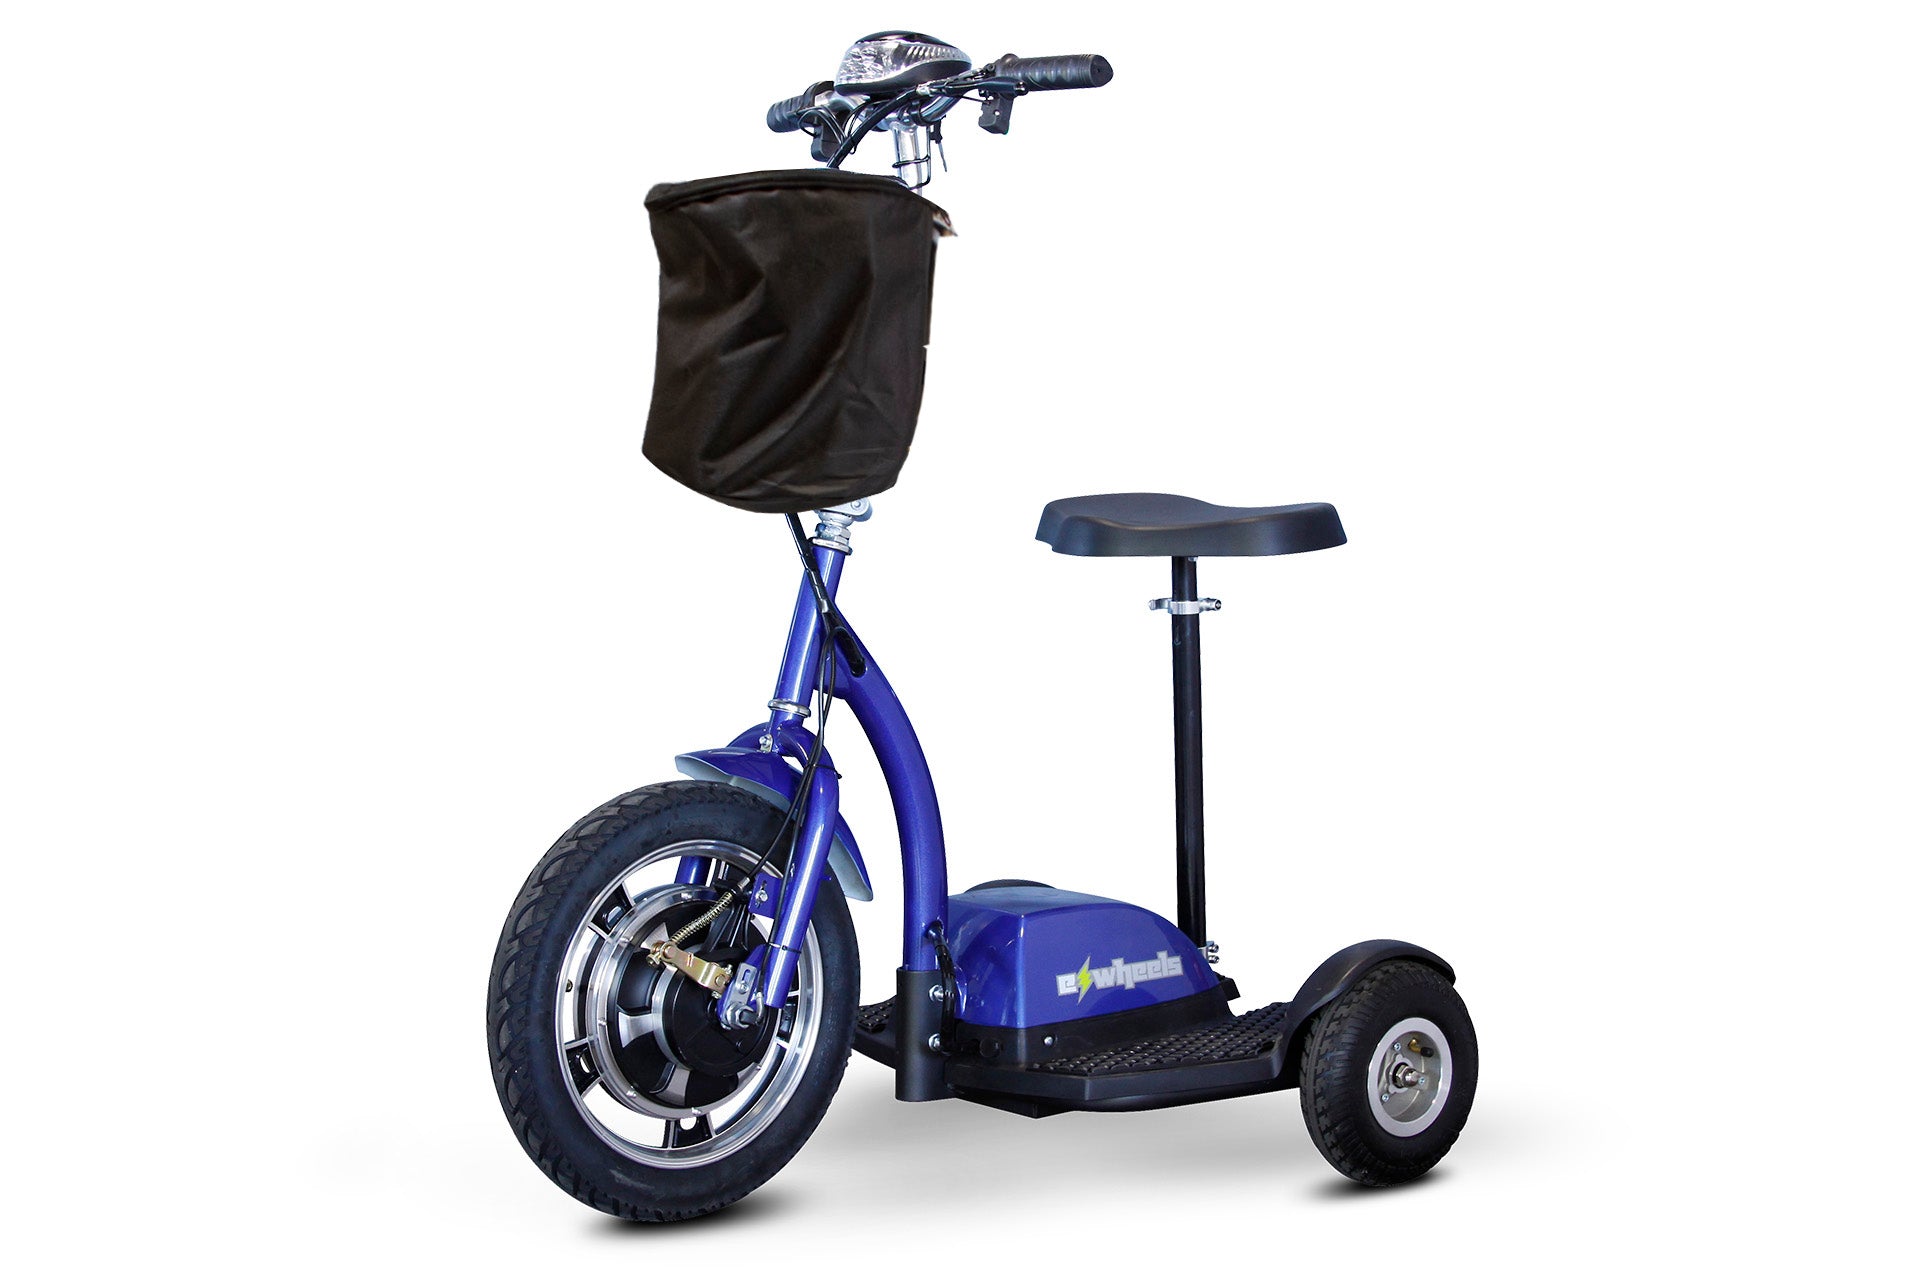 BLUE 3WHEEL SCOOTER EWheels EW-18 Stand-N-Ride 3 Wheel Mobility Recreational Scooter - PureUps